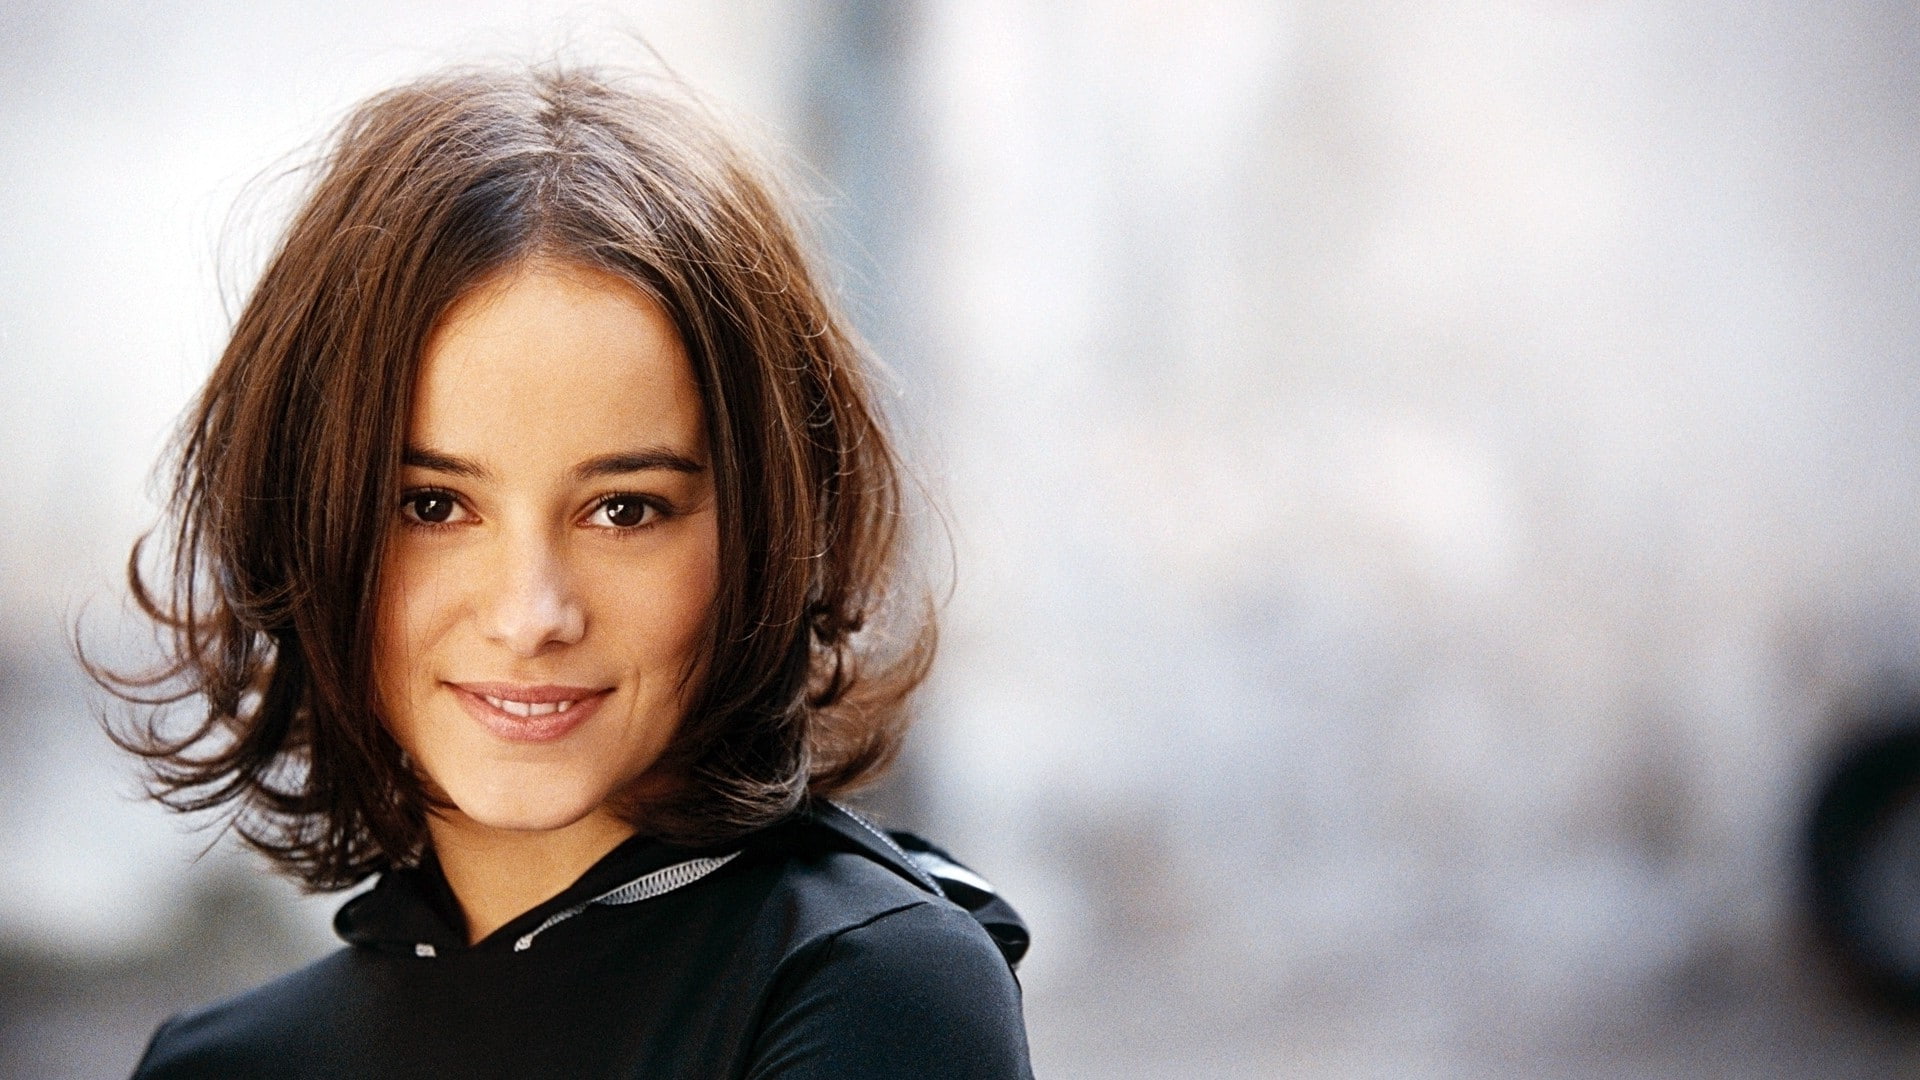 Free Download Hd Wallpaper Alizee Singer Portrait Smiling Looking At Camera Happiness